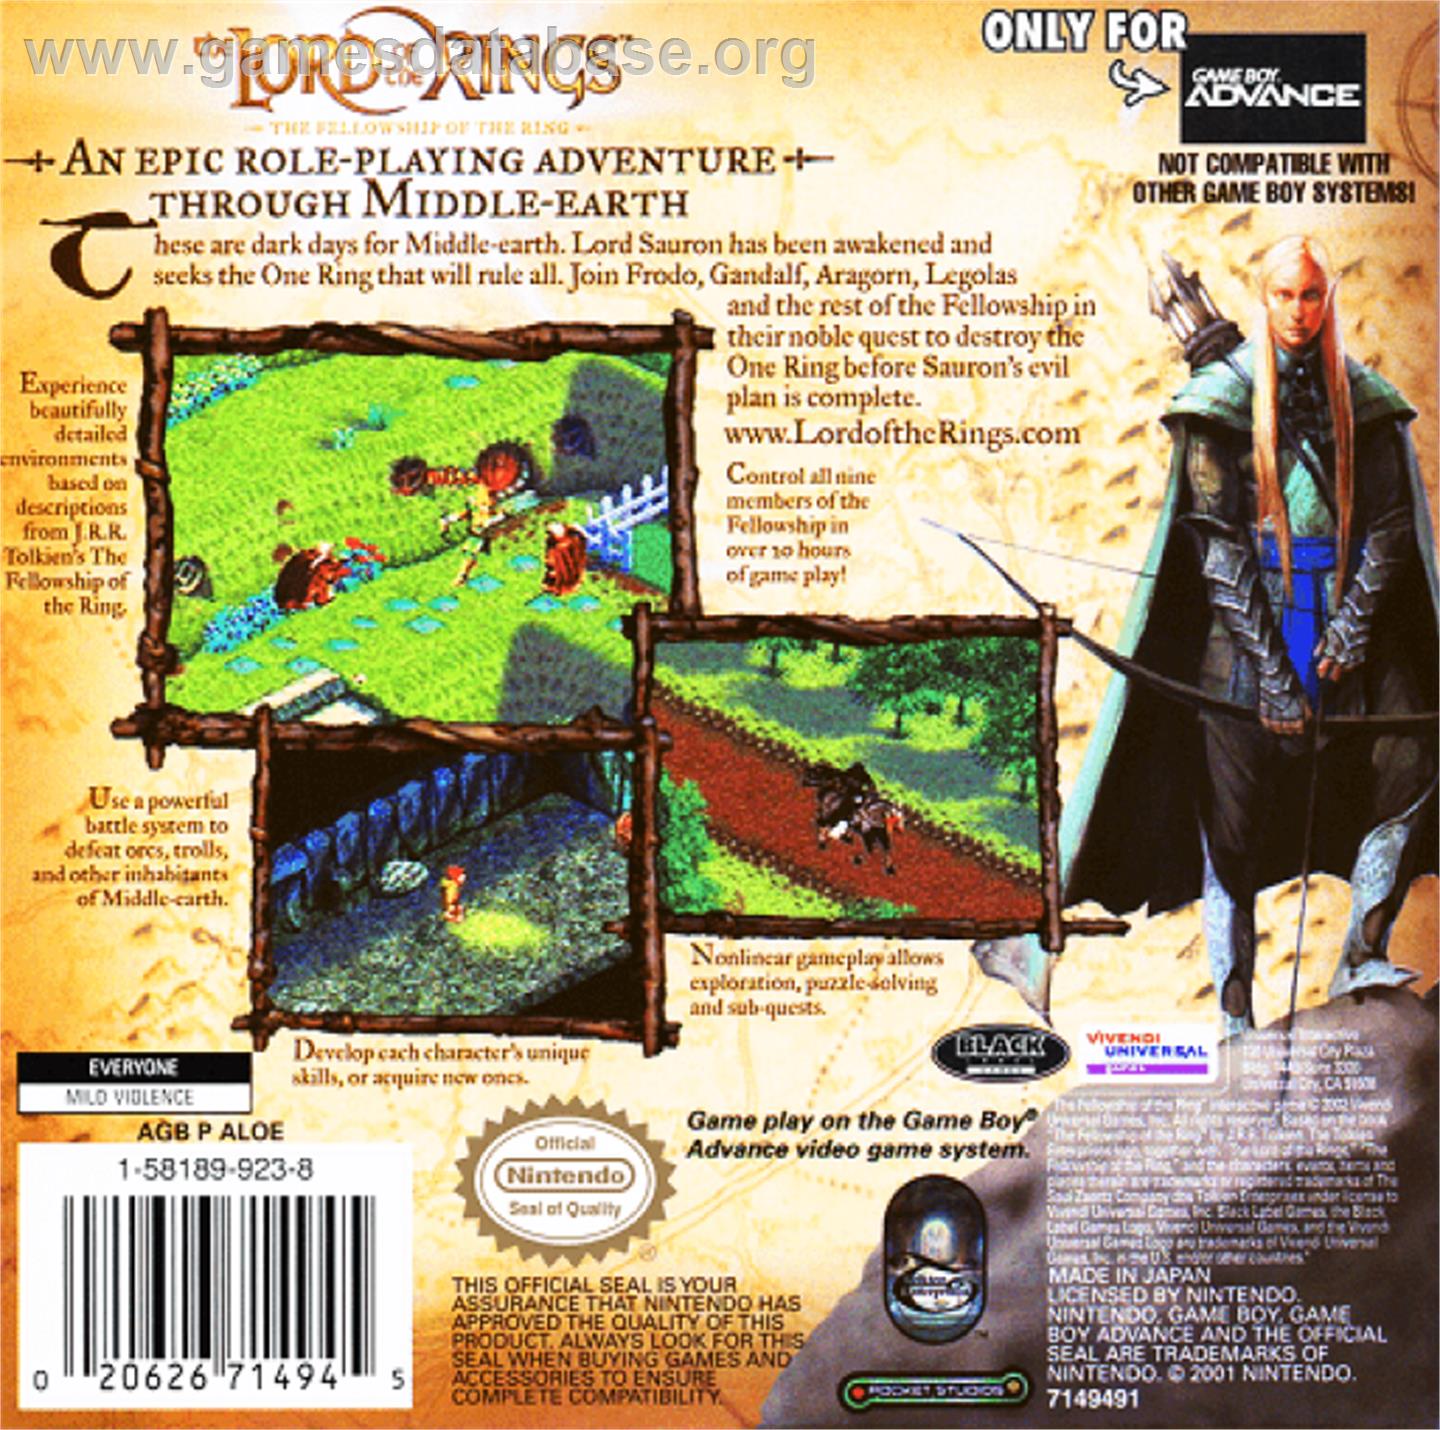 Lord of the Rings: The Fellowship of the Ring - Nintendo Game Boy Advance - Artwork - Box Back